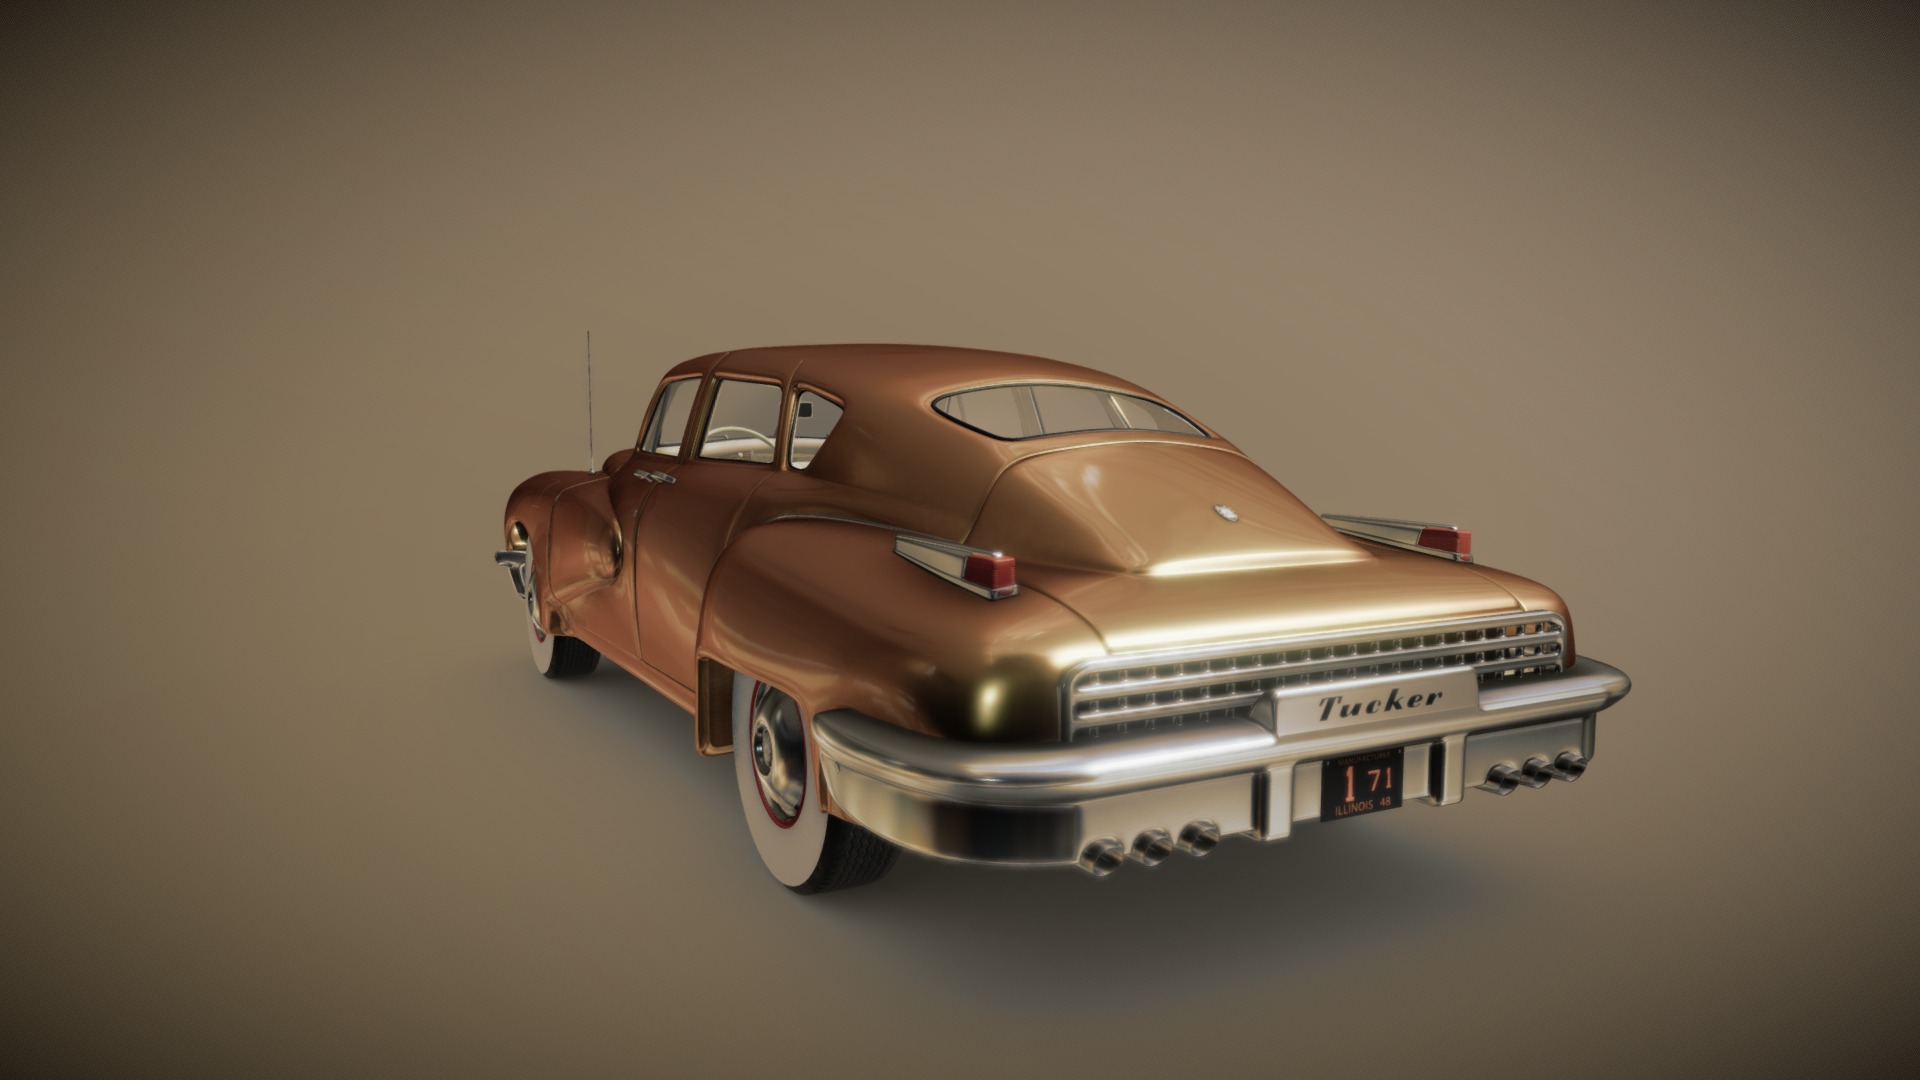 3D model Tucker Torpedo - This is a 3D model of the Tucker Torpedo. The 3D model is about a car parked on a white background.